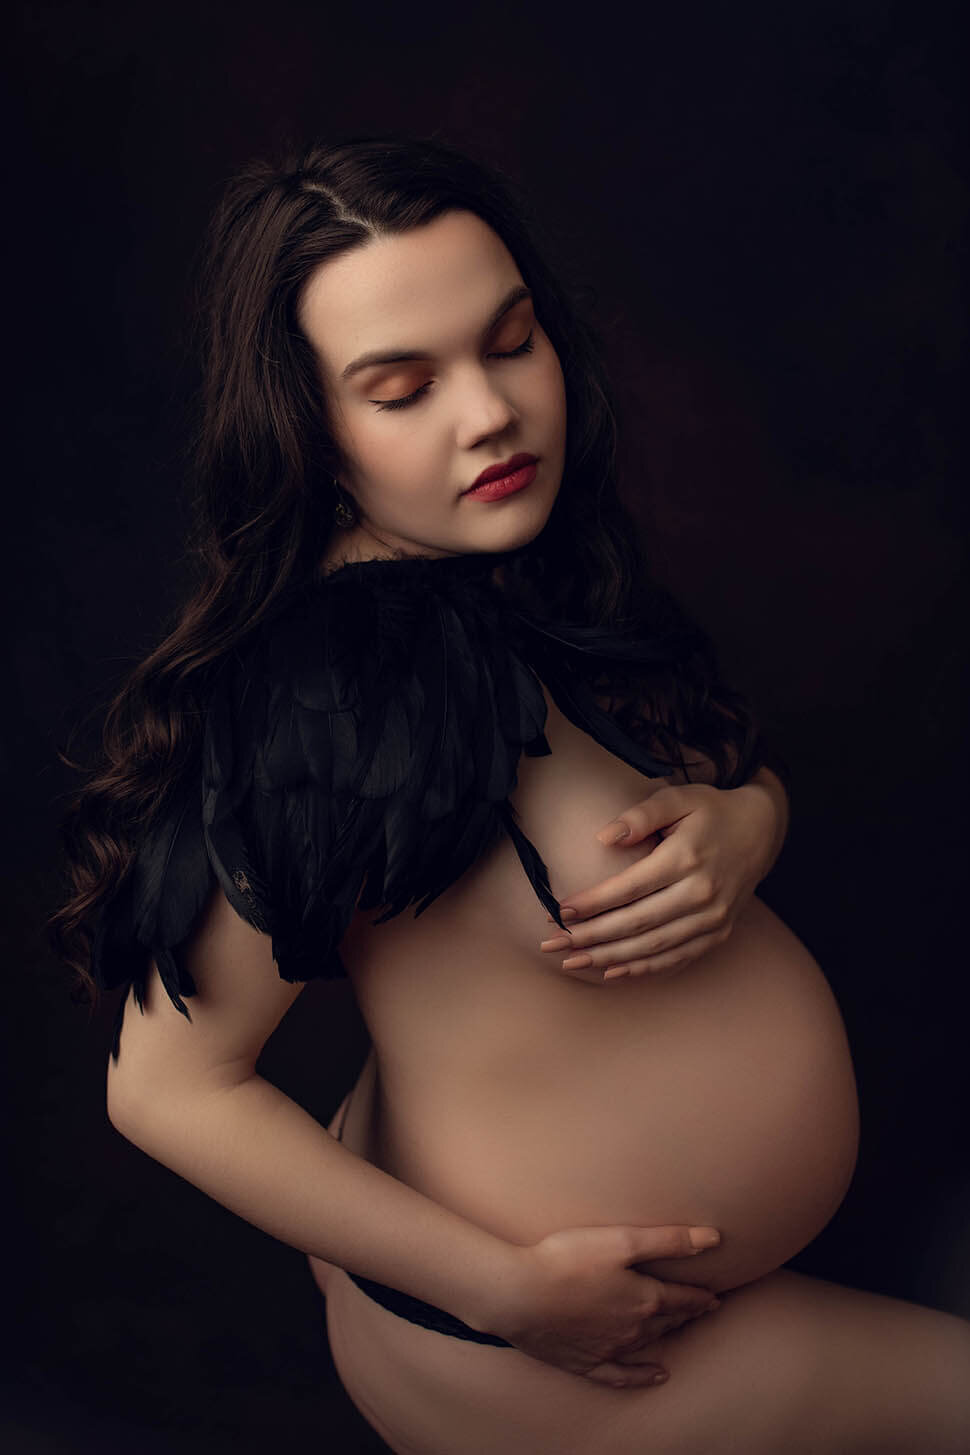 a nude woman holds her bump and breast while wearing a feather capelet and her eyes are closed